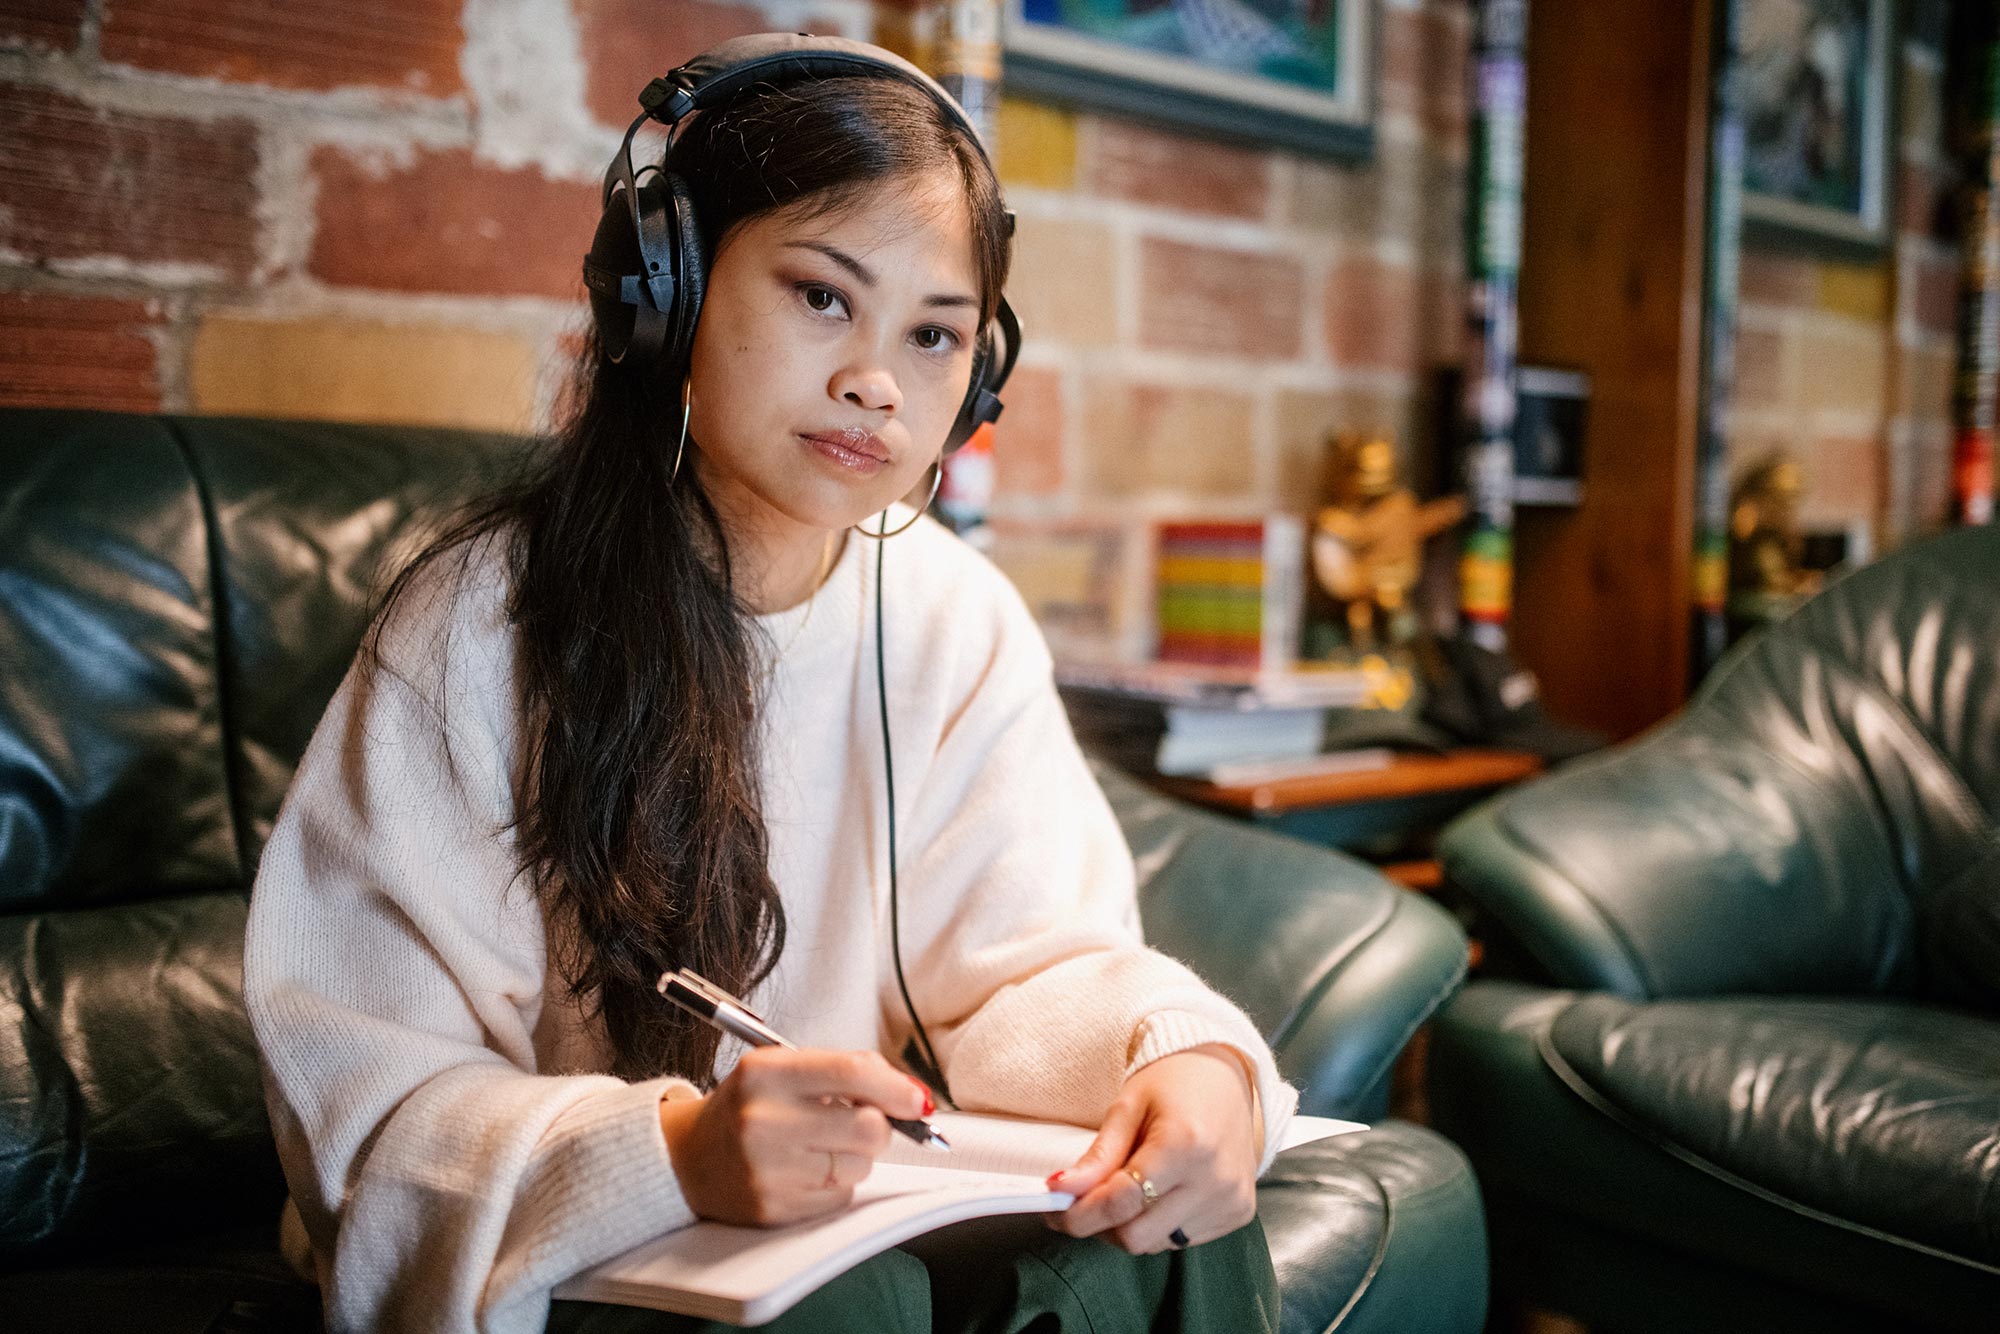 Ruby Ibarra, sitting on a couch with headphones on, writing lyrics in a notebook.